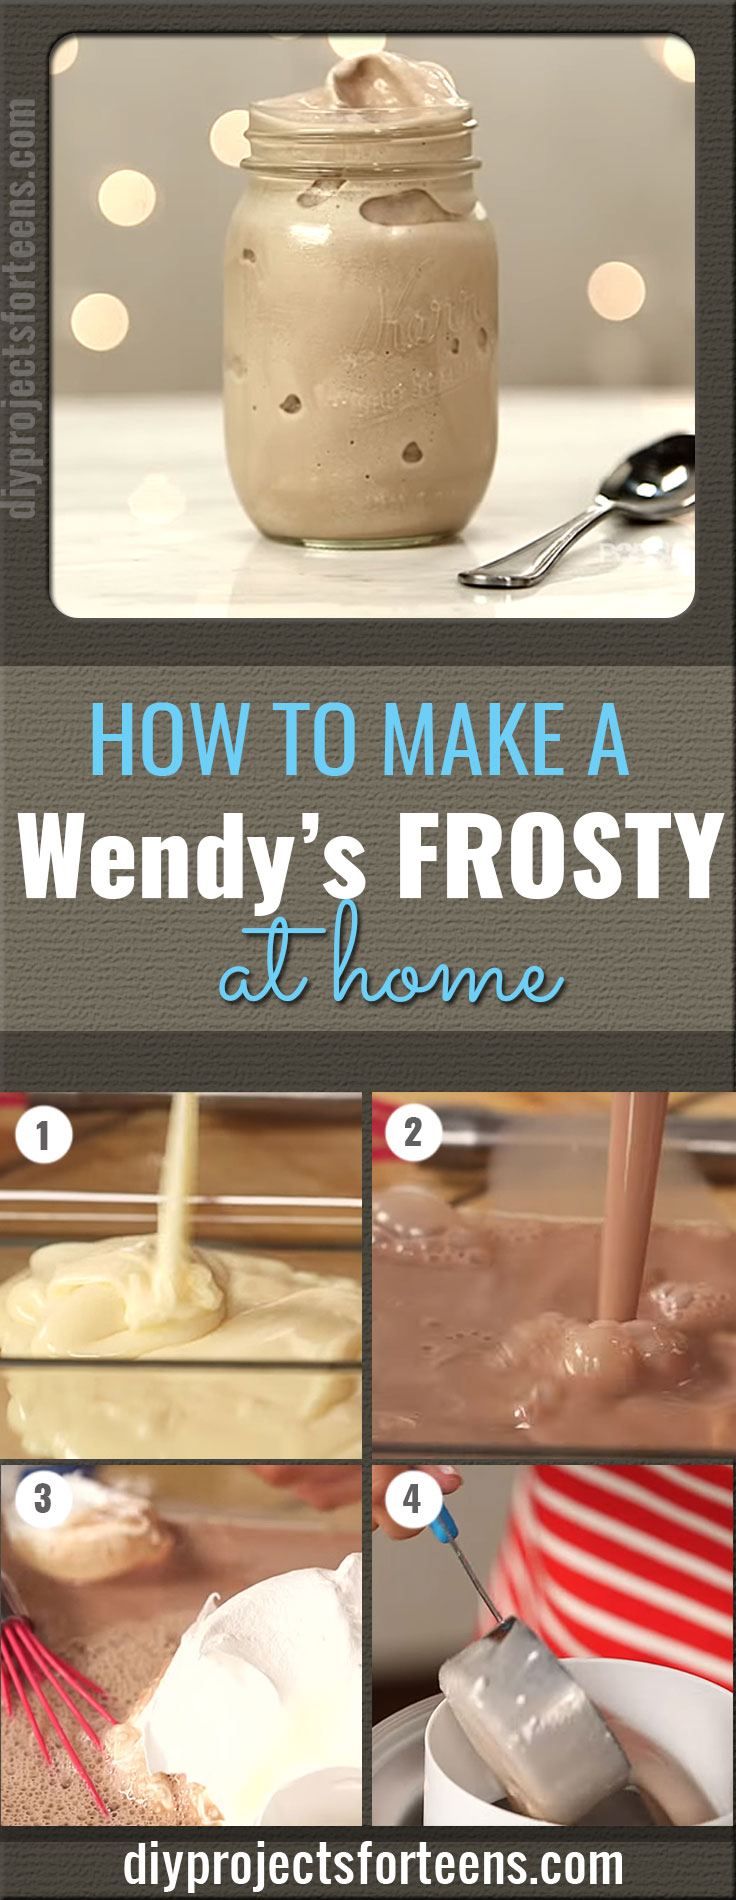 Easy Recipes For Kids to Make at Home - Cool Recipe Ideas for Teens and Tweens. How to Make a Wendy's Frosty With only 3 Ingredients